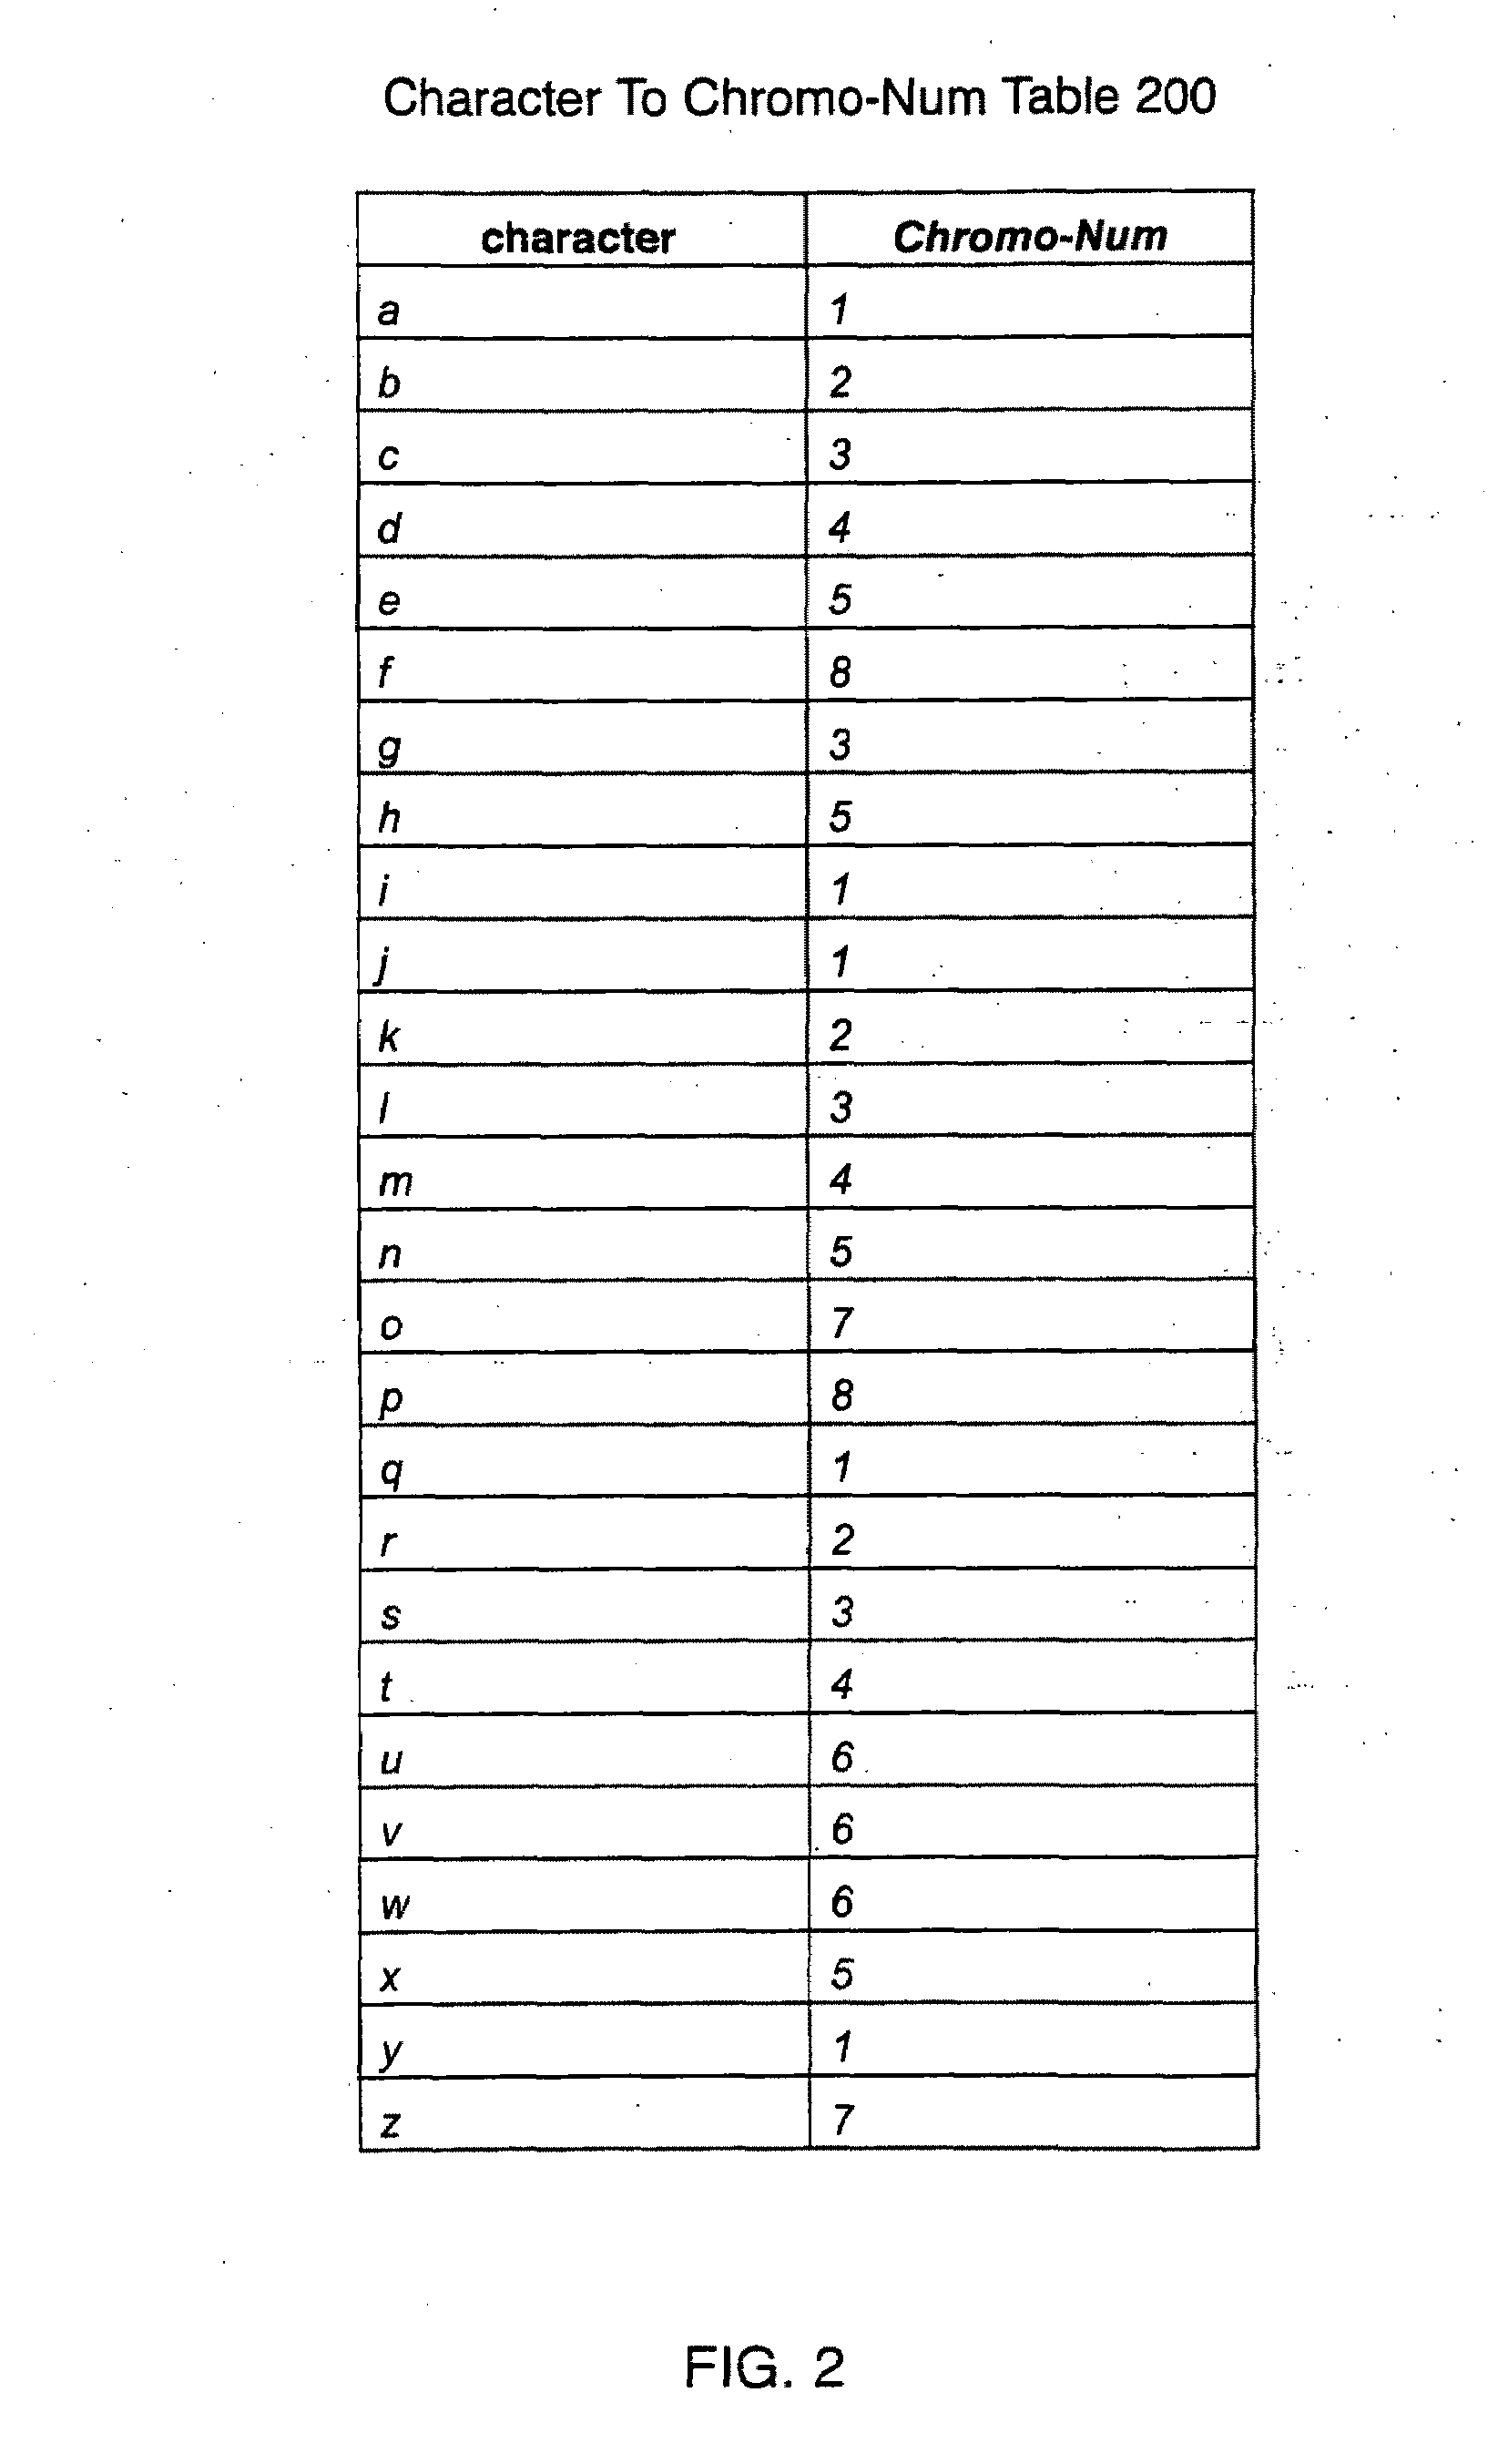 System and method for analyzing text using emotional intelligence factors